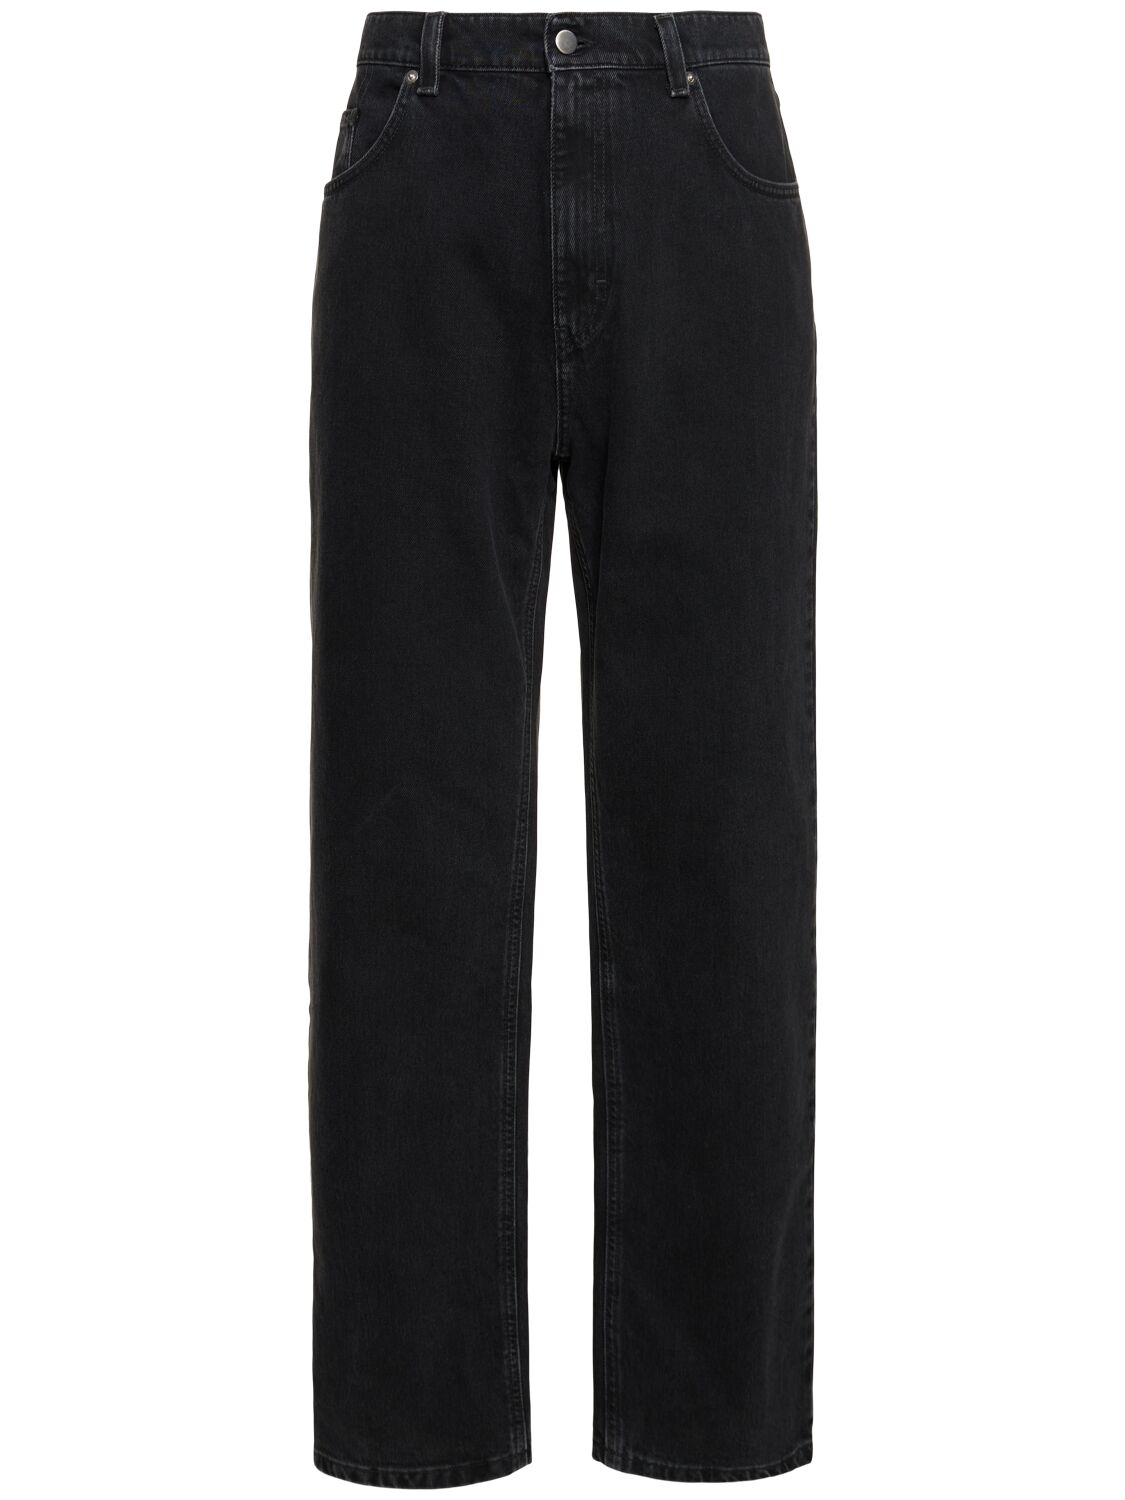 Shop Axel Arigato Zine Relaxed Cotton Denim Jeans In Black